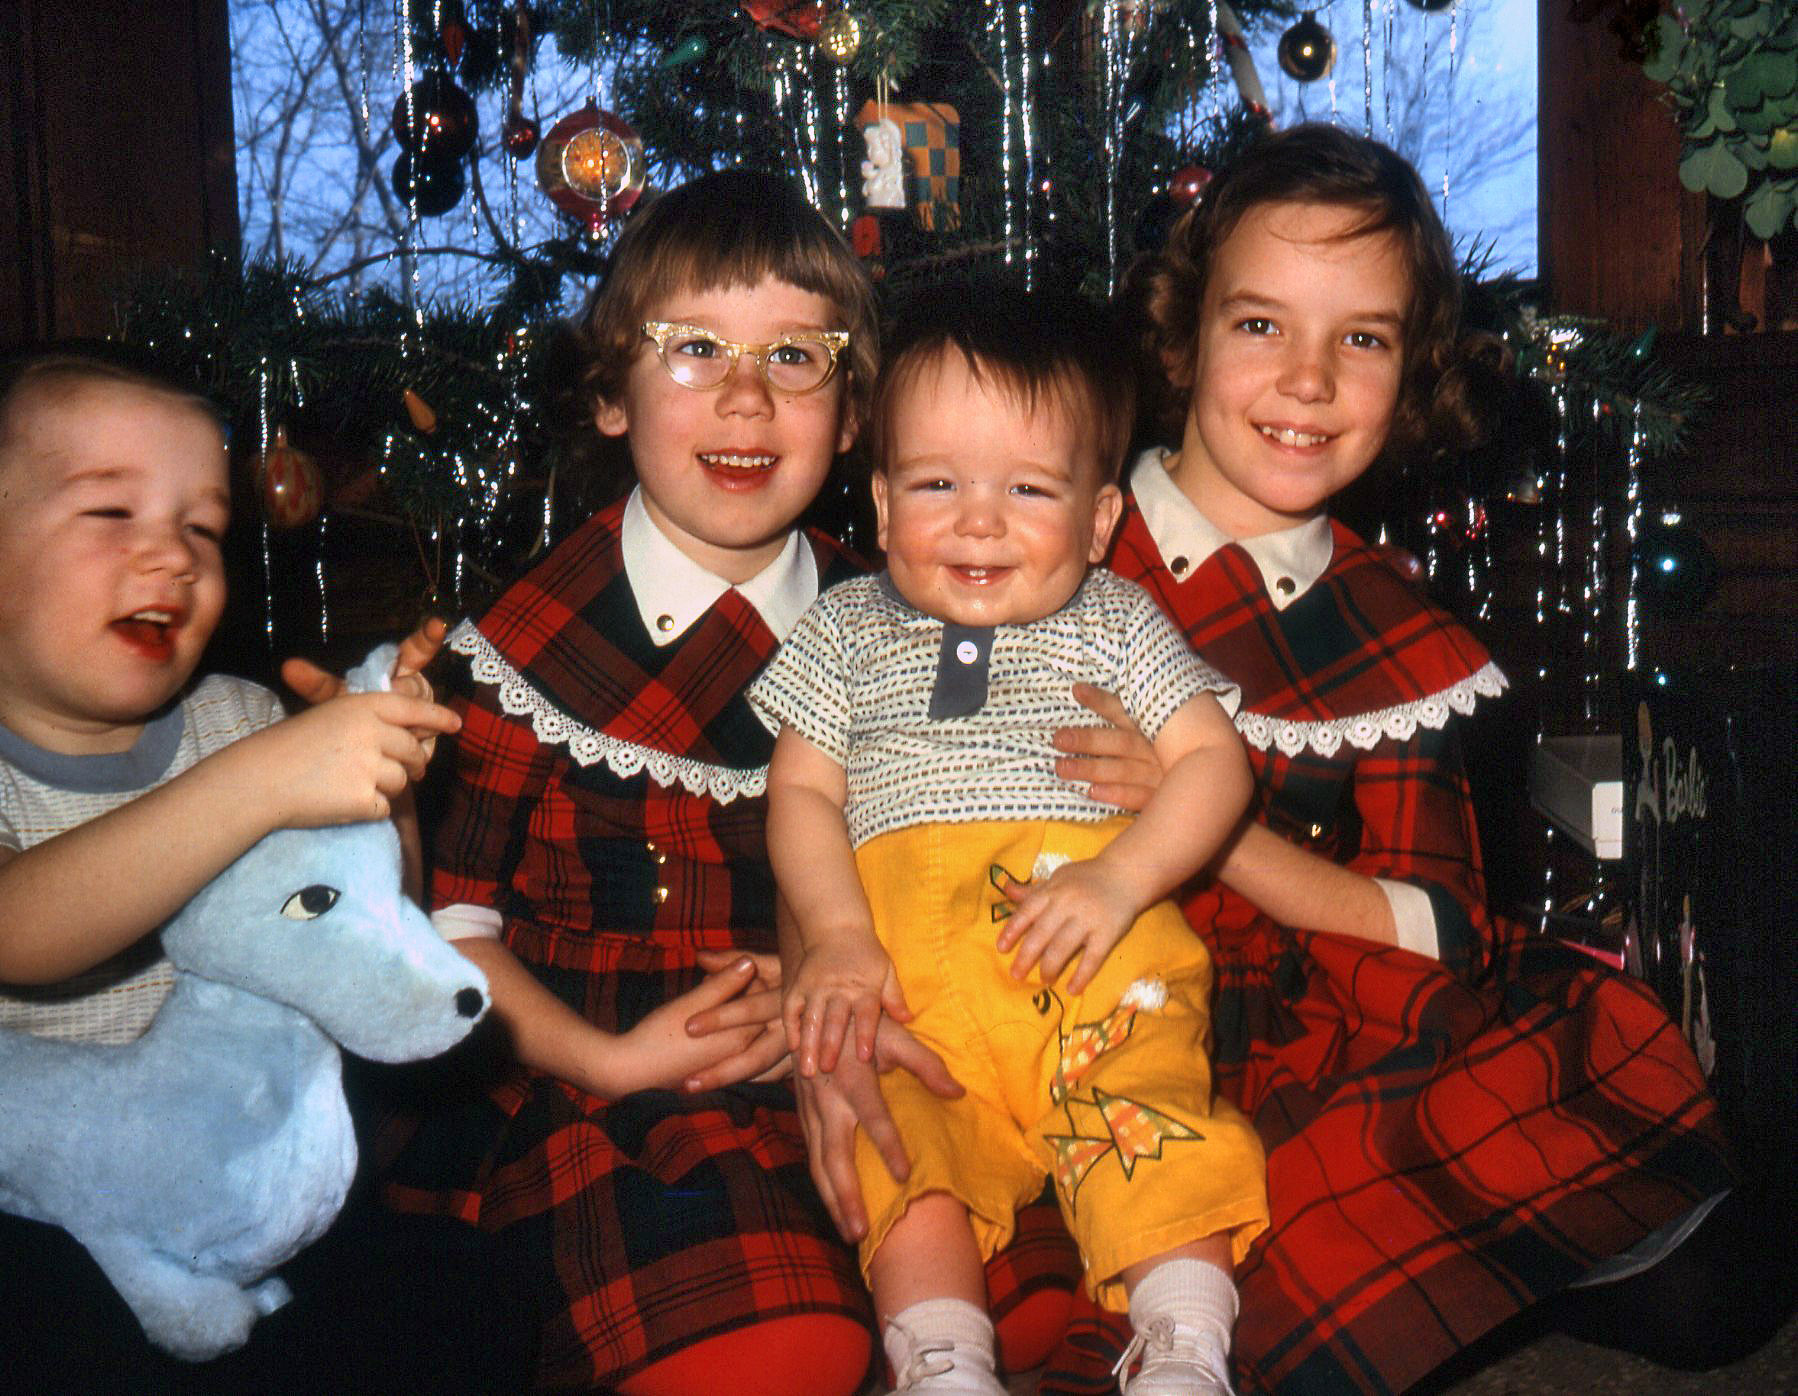 Christmas 1963 in Rochester, Indiana. From a slide. View full size.